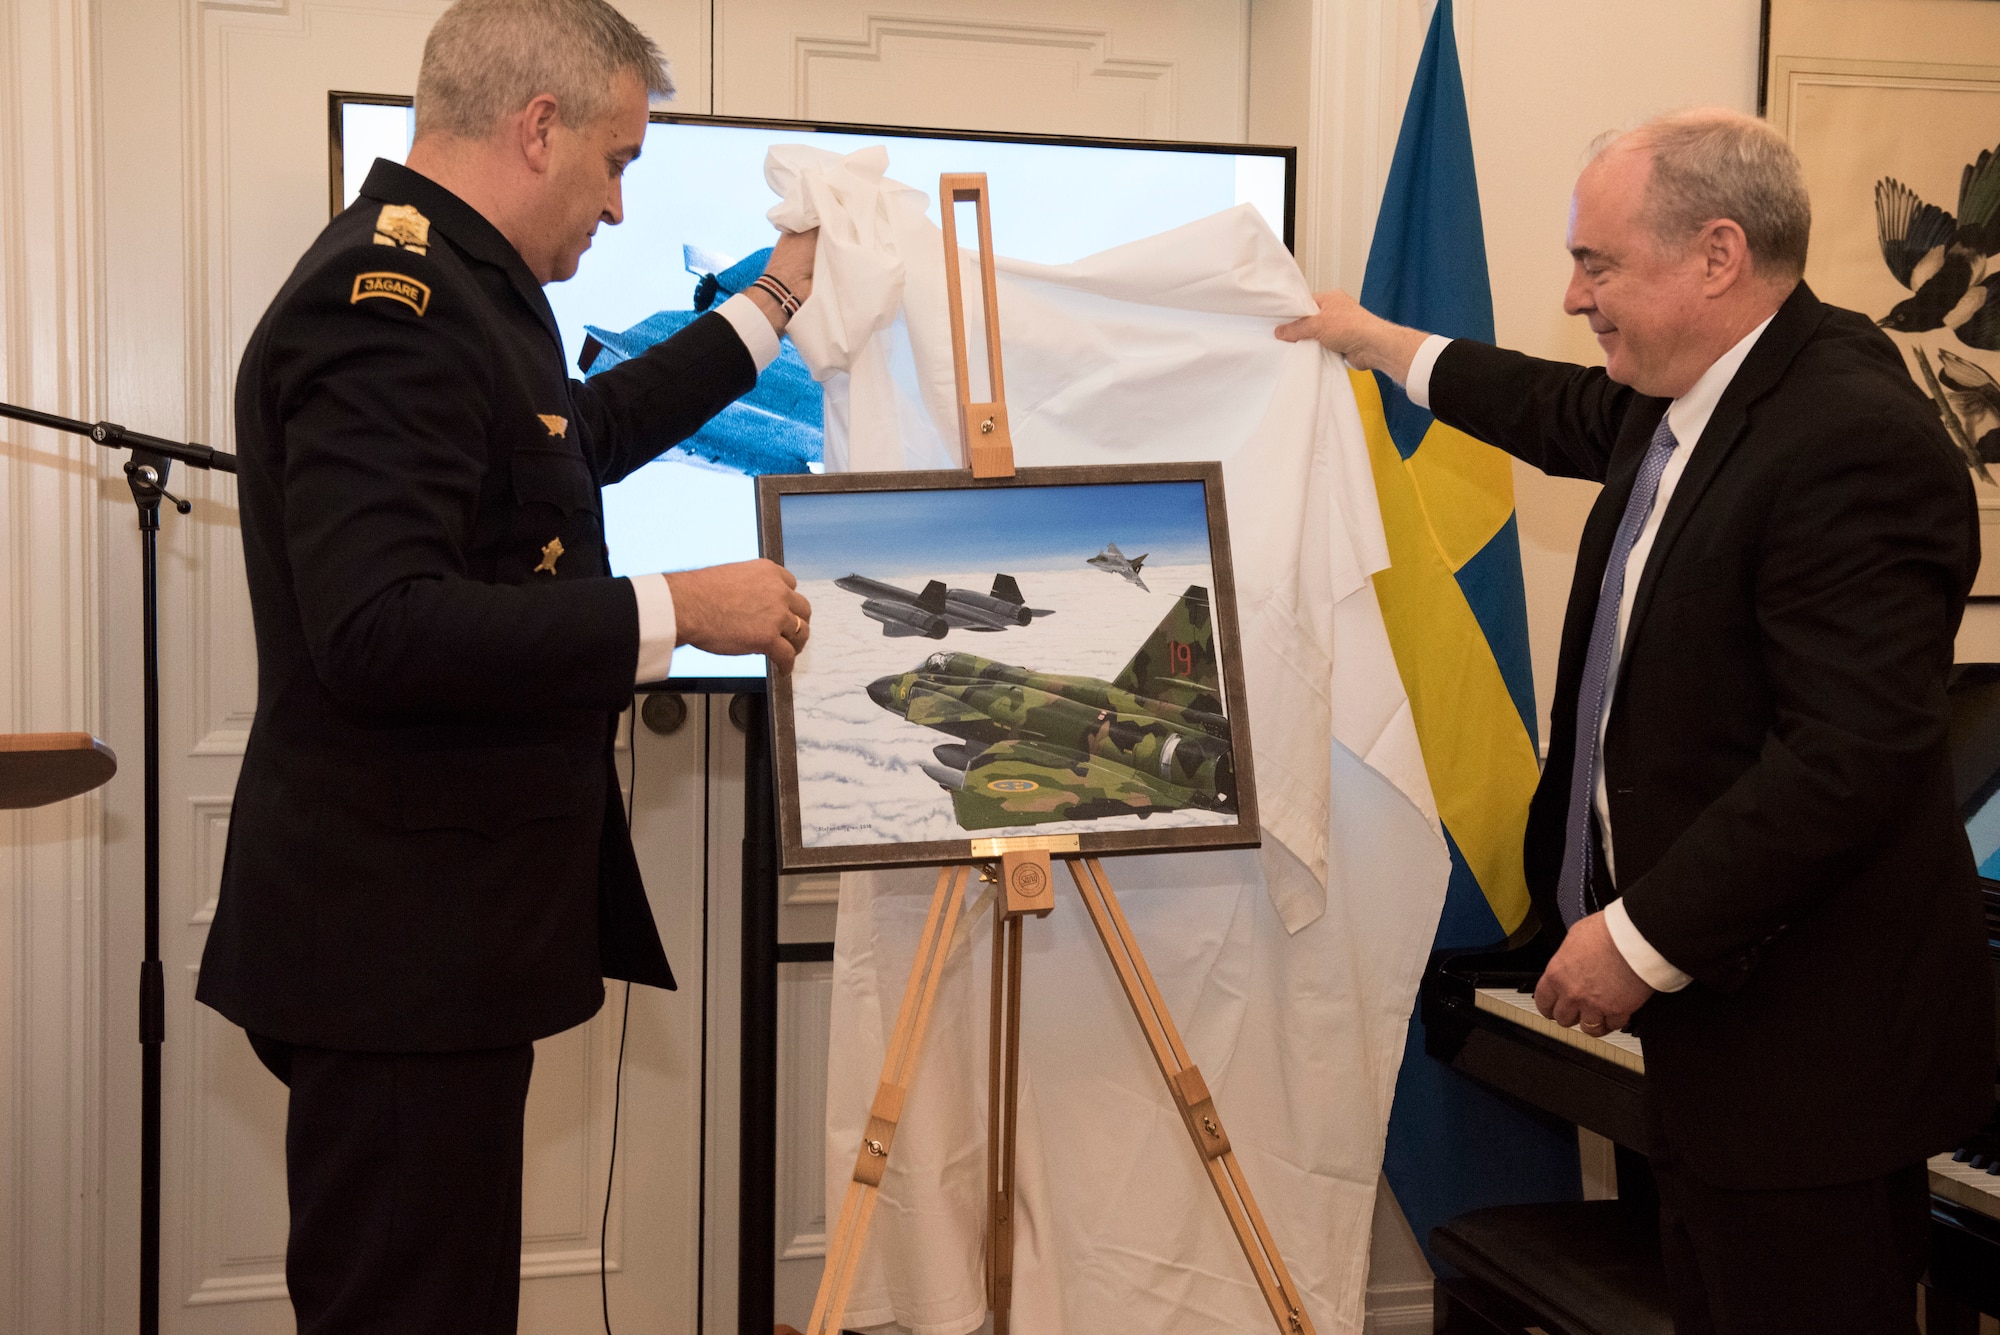 Swedish and U.S. representatives unveil an official portrait of the event which distinguished the four Swedish pilots and earned them their U.S. Air Medals in Stockholm, Sweden, Nov. 28, 2018. The Swedish Airmen risked their lives to save an SR-71 and the aircrew on June 29, 1987. (U.S. Air Force Photo by Senior Airman Kelly O'Connor)